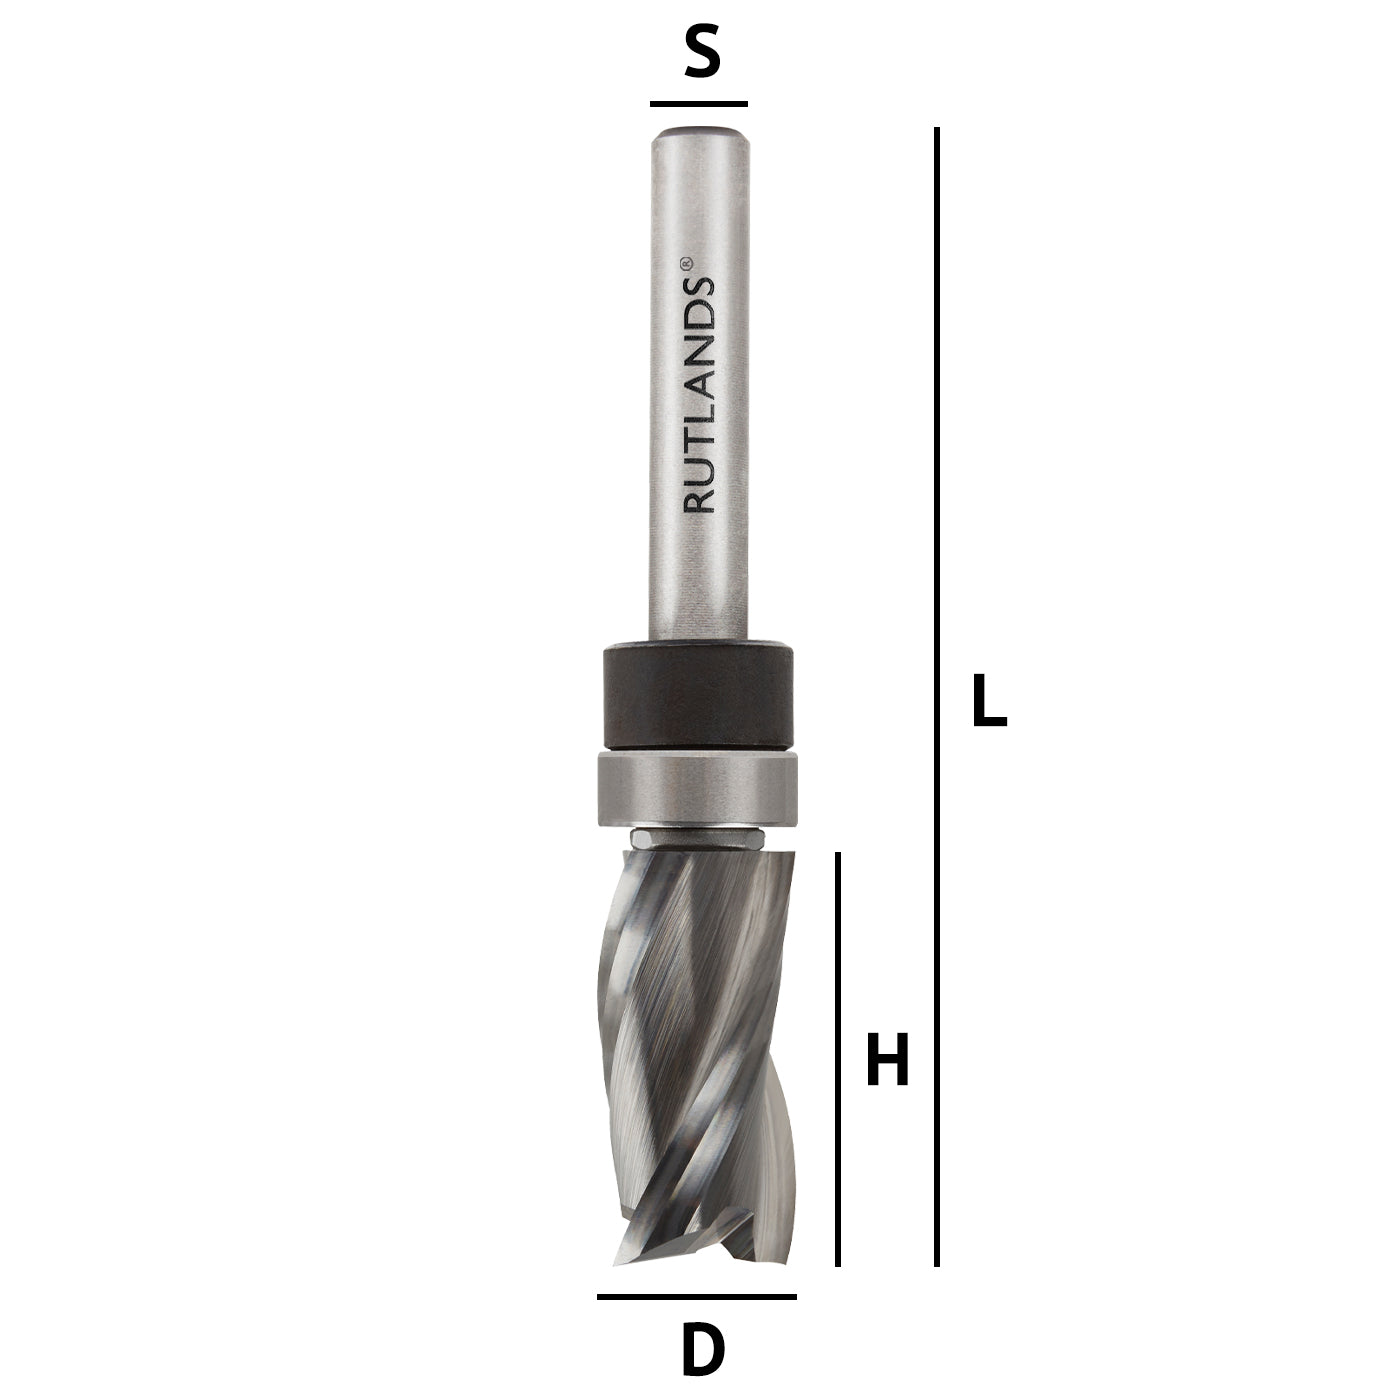 Solid Carbide - Spiral Up Cut 2 Flute with Top Bearing - D=12.7mm H=25mm L=72mm S=1/4"